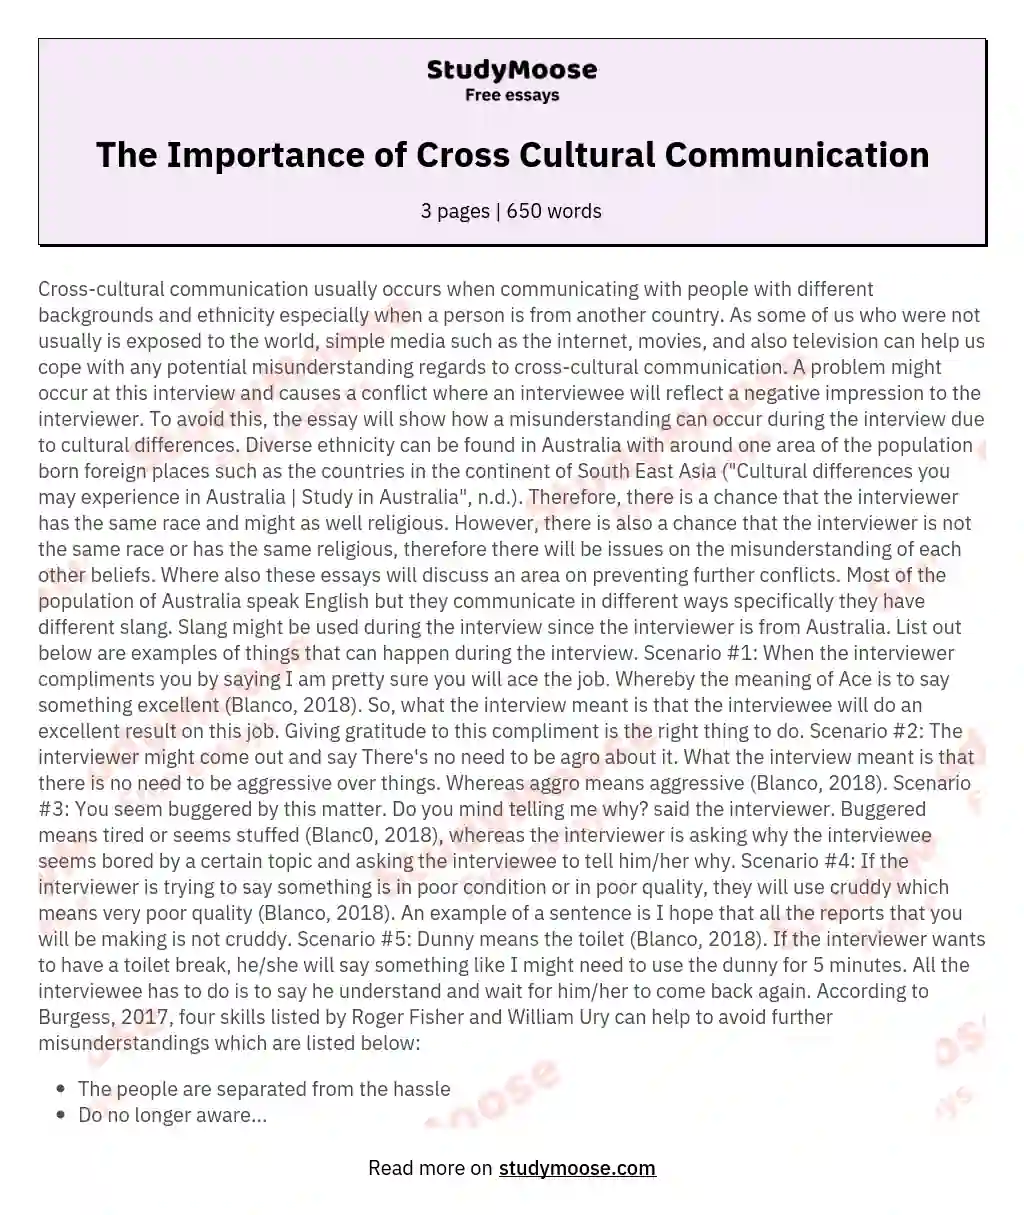 The Importance of Cross Cultural Communication essay